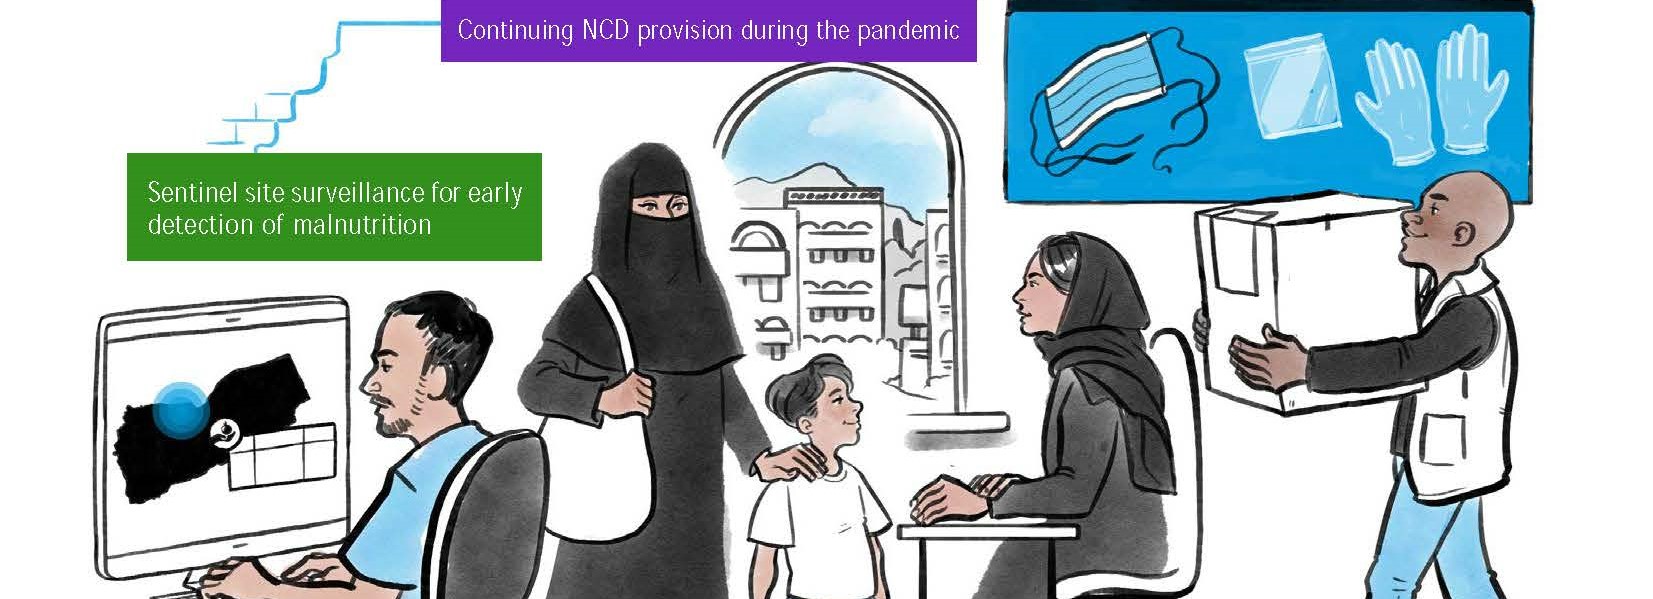 Ensuring continuity of care for patients with NCDs in Yemen: Lessons from the COVID-19 pandemic